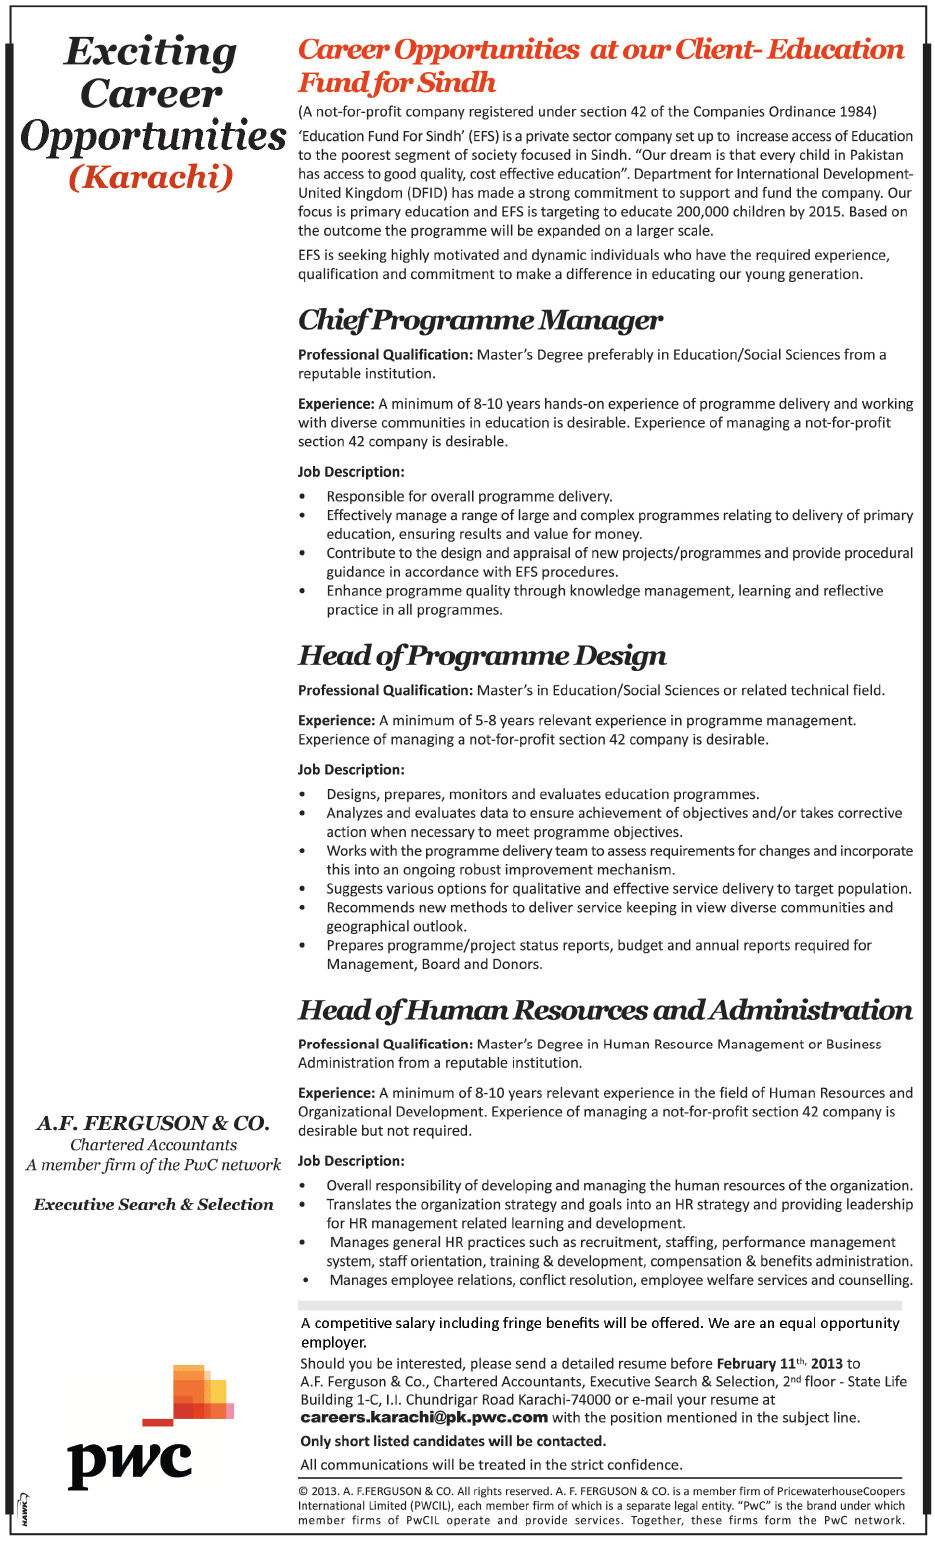 Education Fund for Sindh (EFS) Jobs 2013 for Executives through PwC (A. F. Ferguson & Co.)